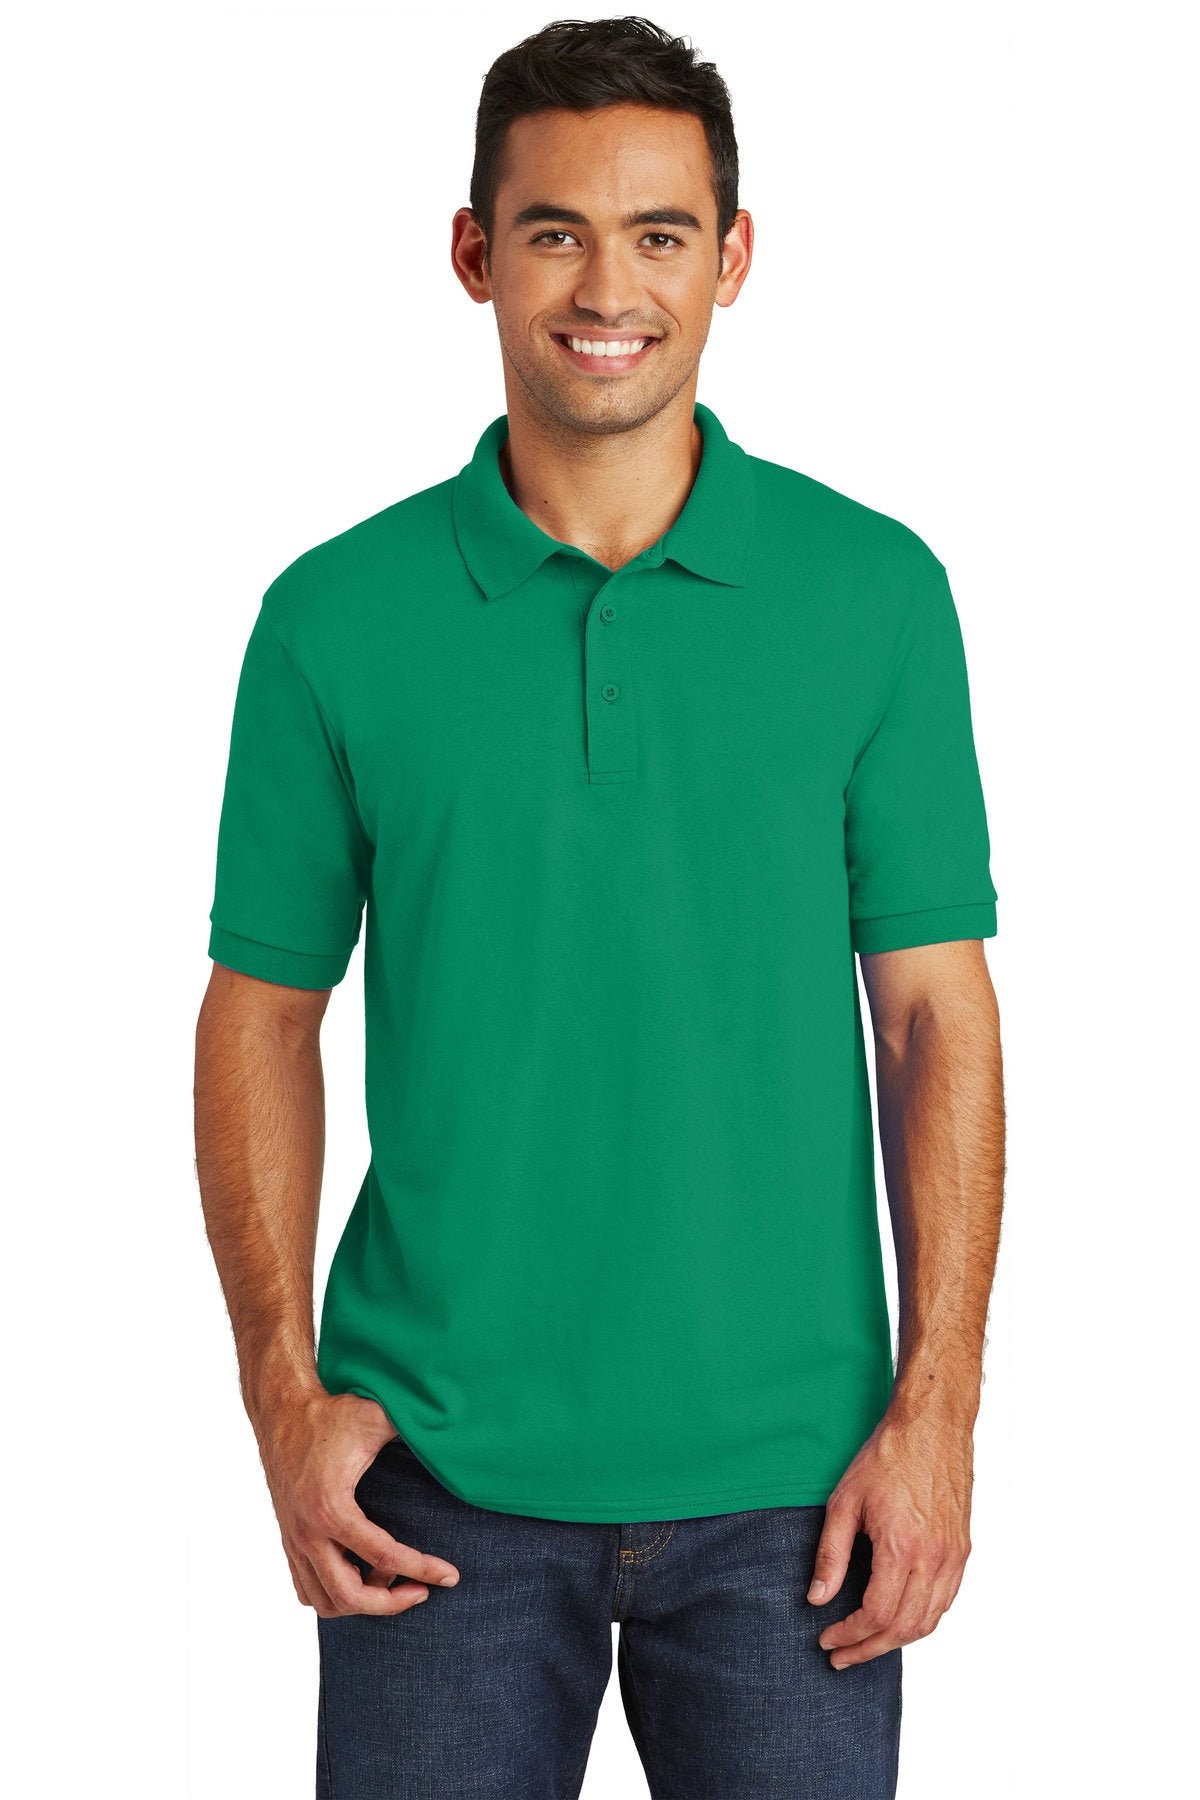 Custom Embroider Core Blend Jersey Knit Polo - Includes 4In X Embroidery No Setup Cost